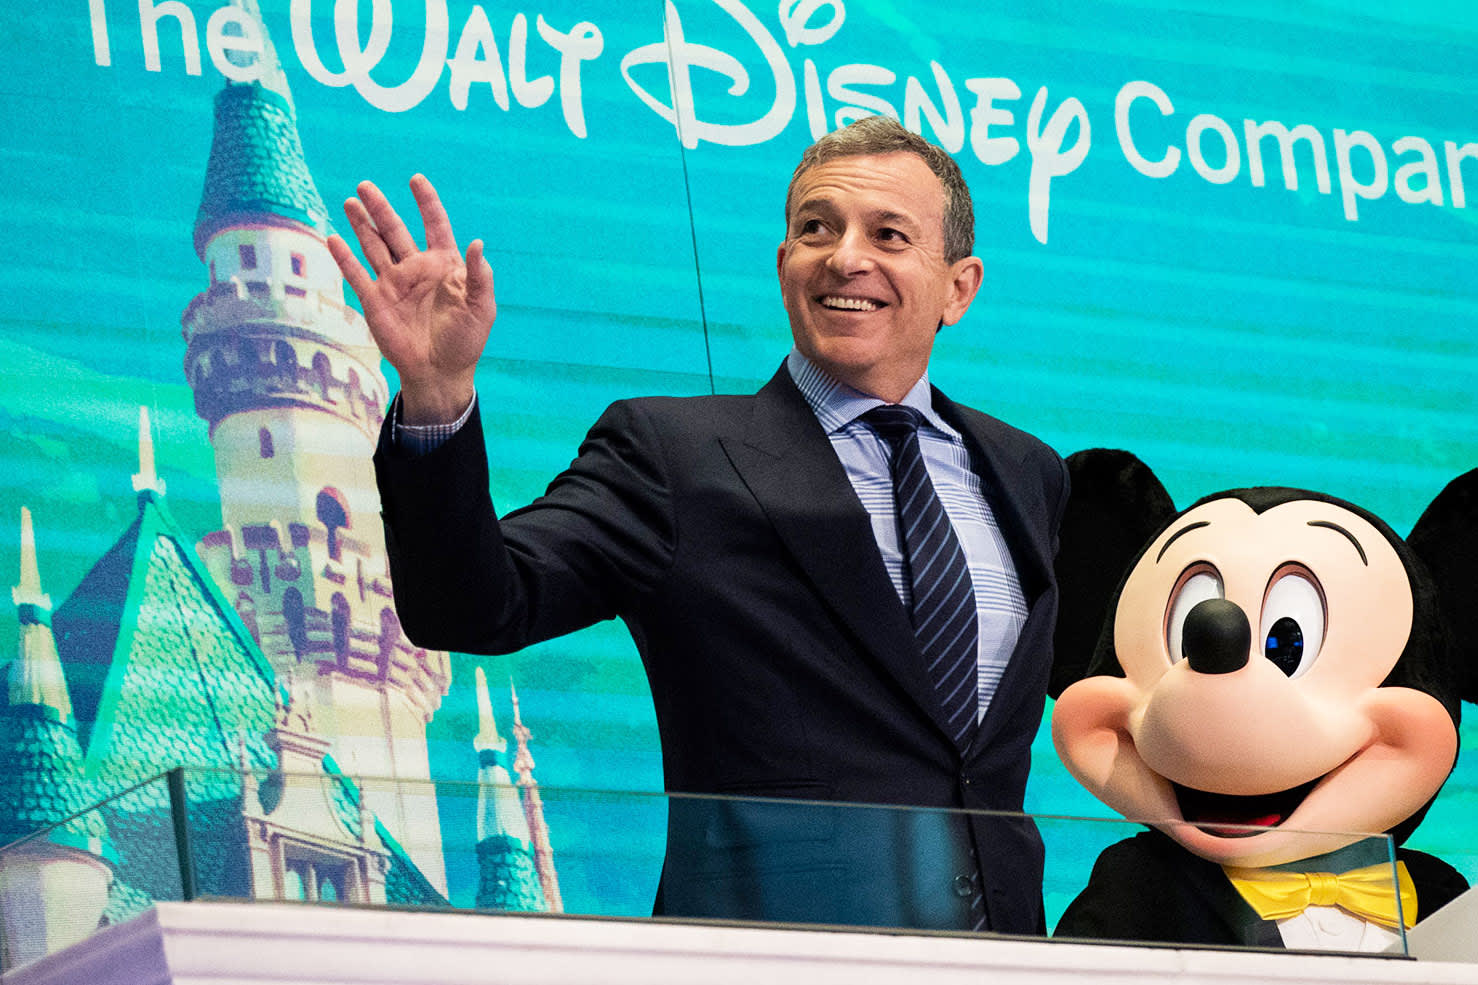 Disney hiring freeze will stay in place, CEO Bob Iger tells employees